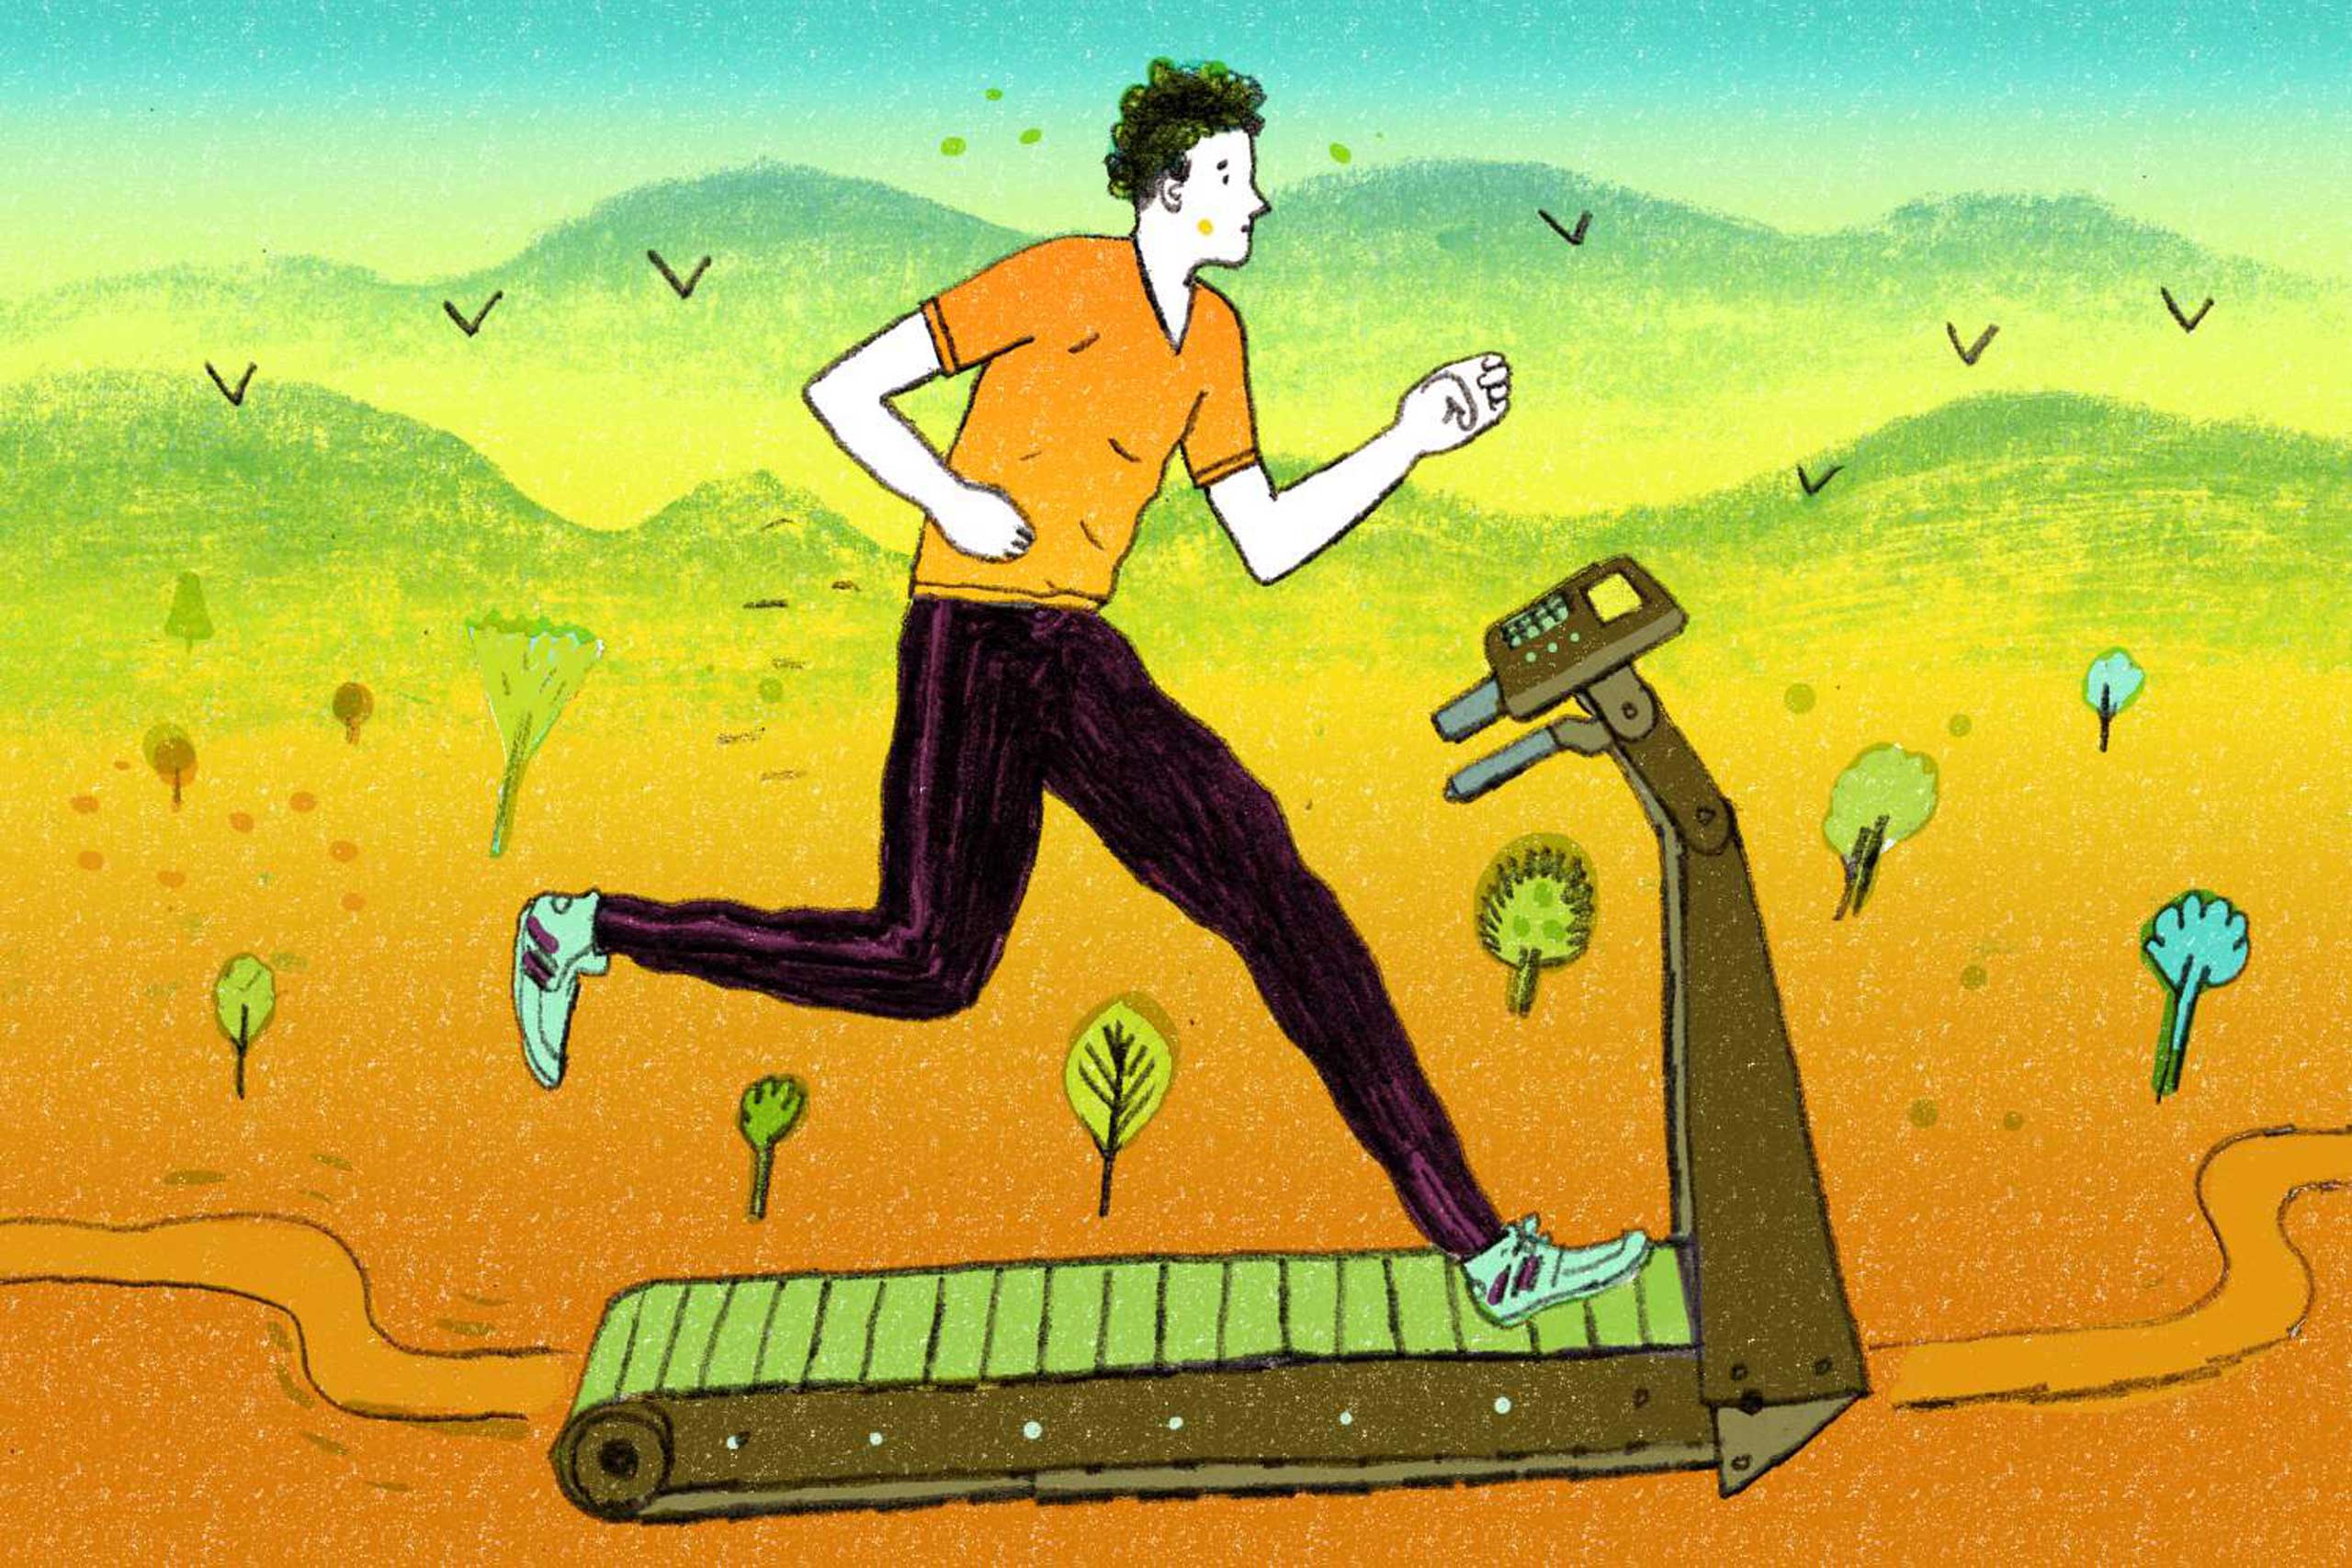 <strong><a href="http://time.com/3578343/exercise-treadmill-running/" target="_blank">You Asked: Is Running on a Treadmill as Good as Running Outside?</a></strong>  You'll fool your body into thinking it's outside with this one small treadmill tweak. (Illustration by Peter Oumanski for TIME)